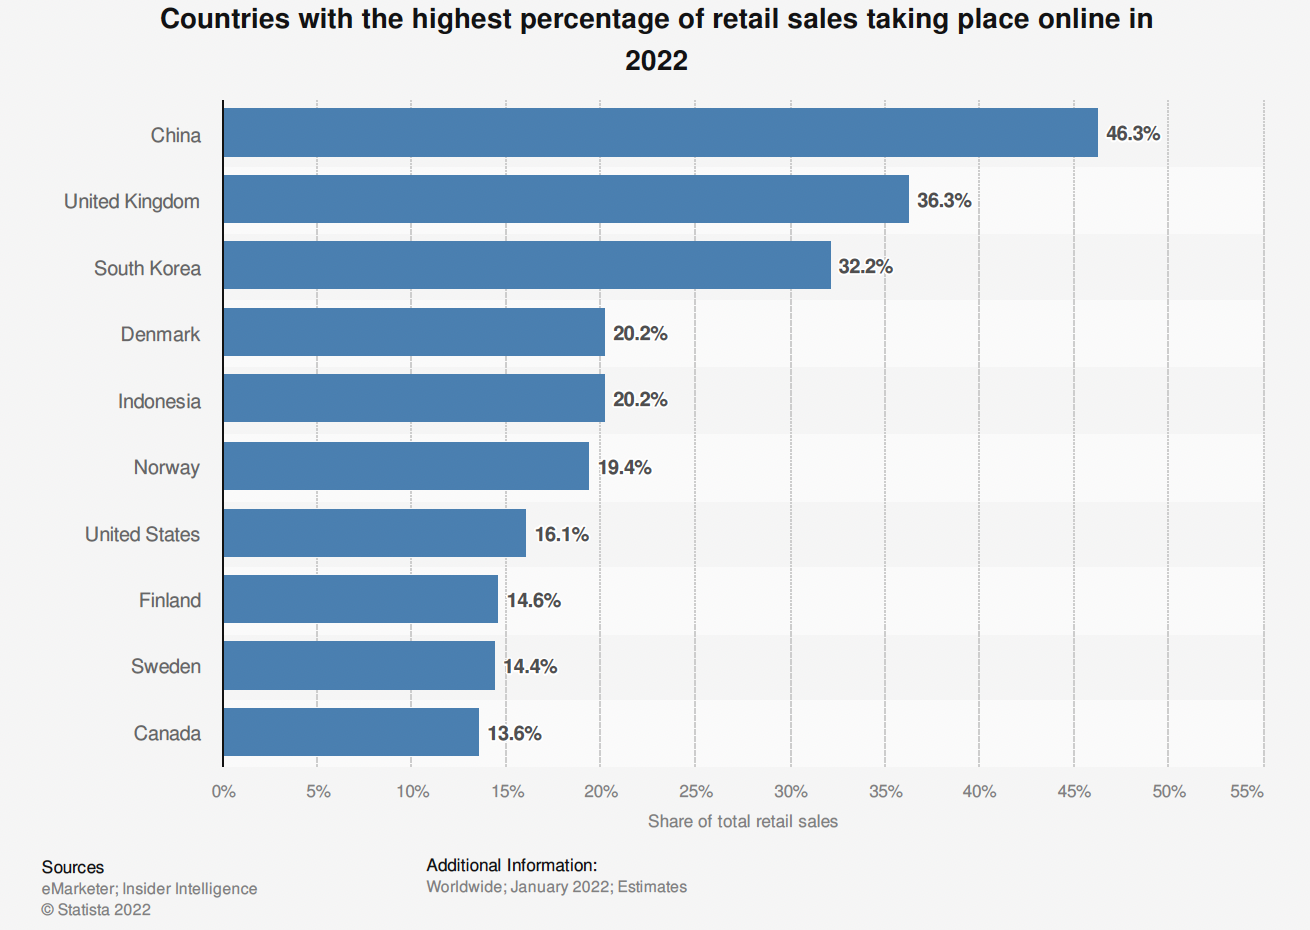 Countries with the highest percentage of retail sales taking place online in 2022